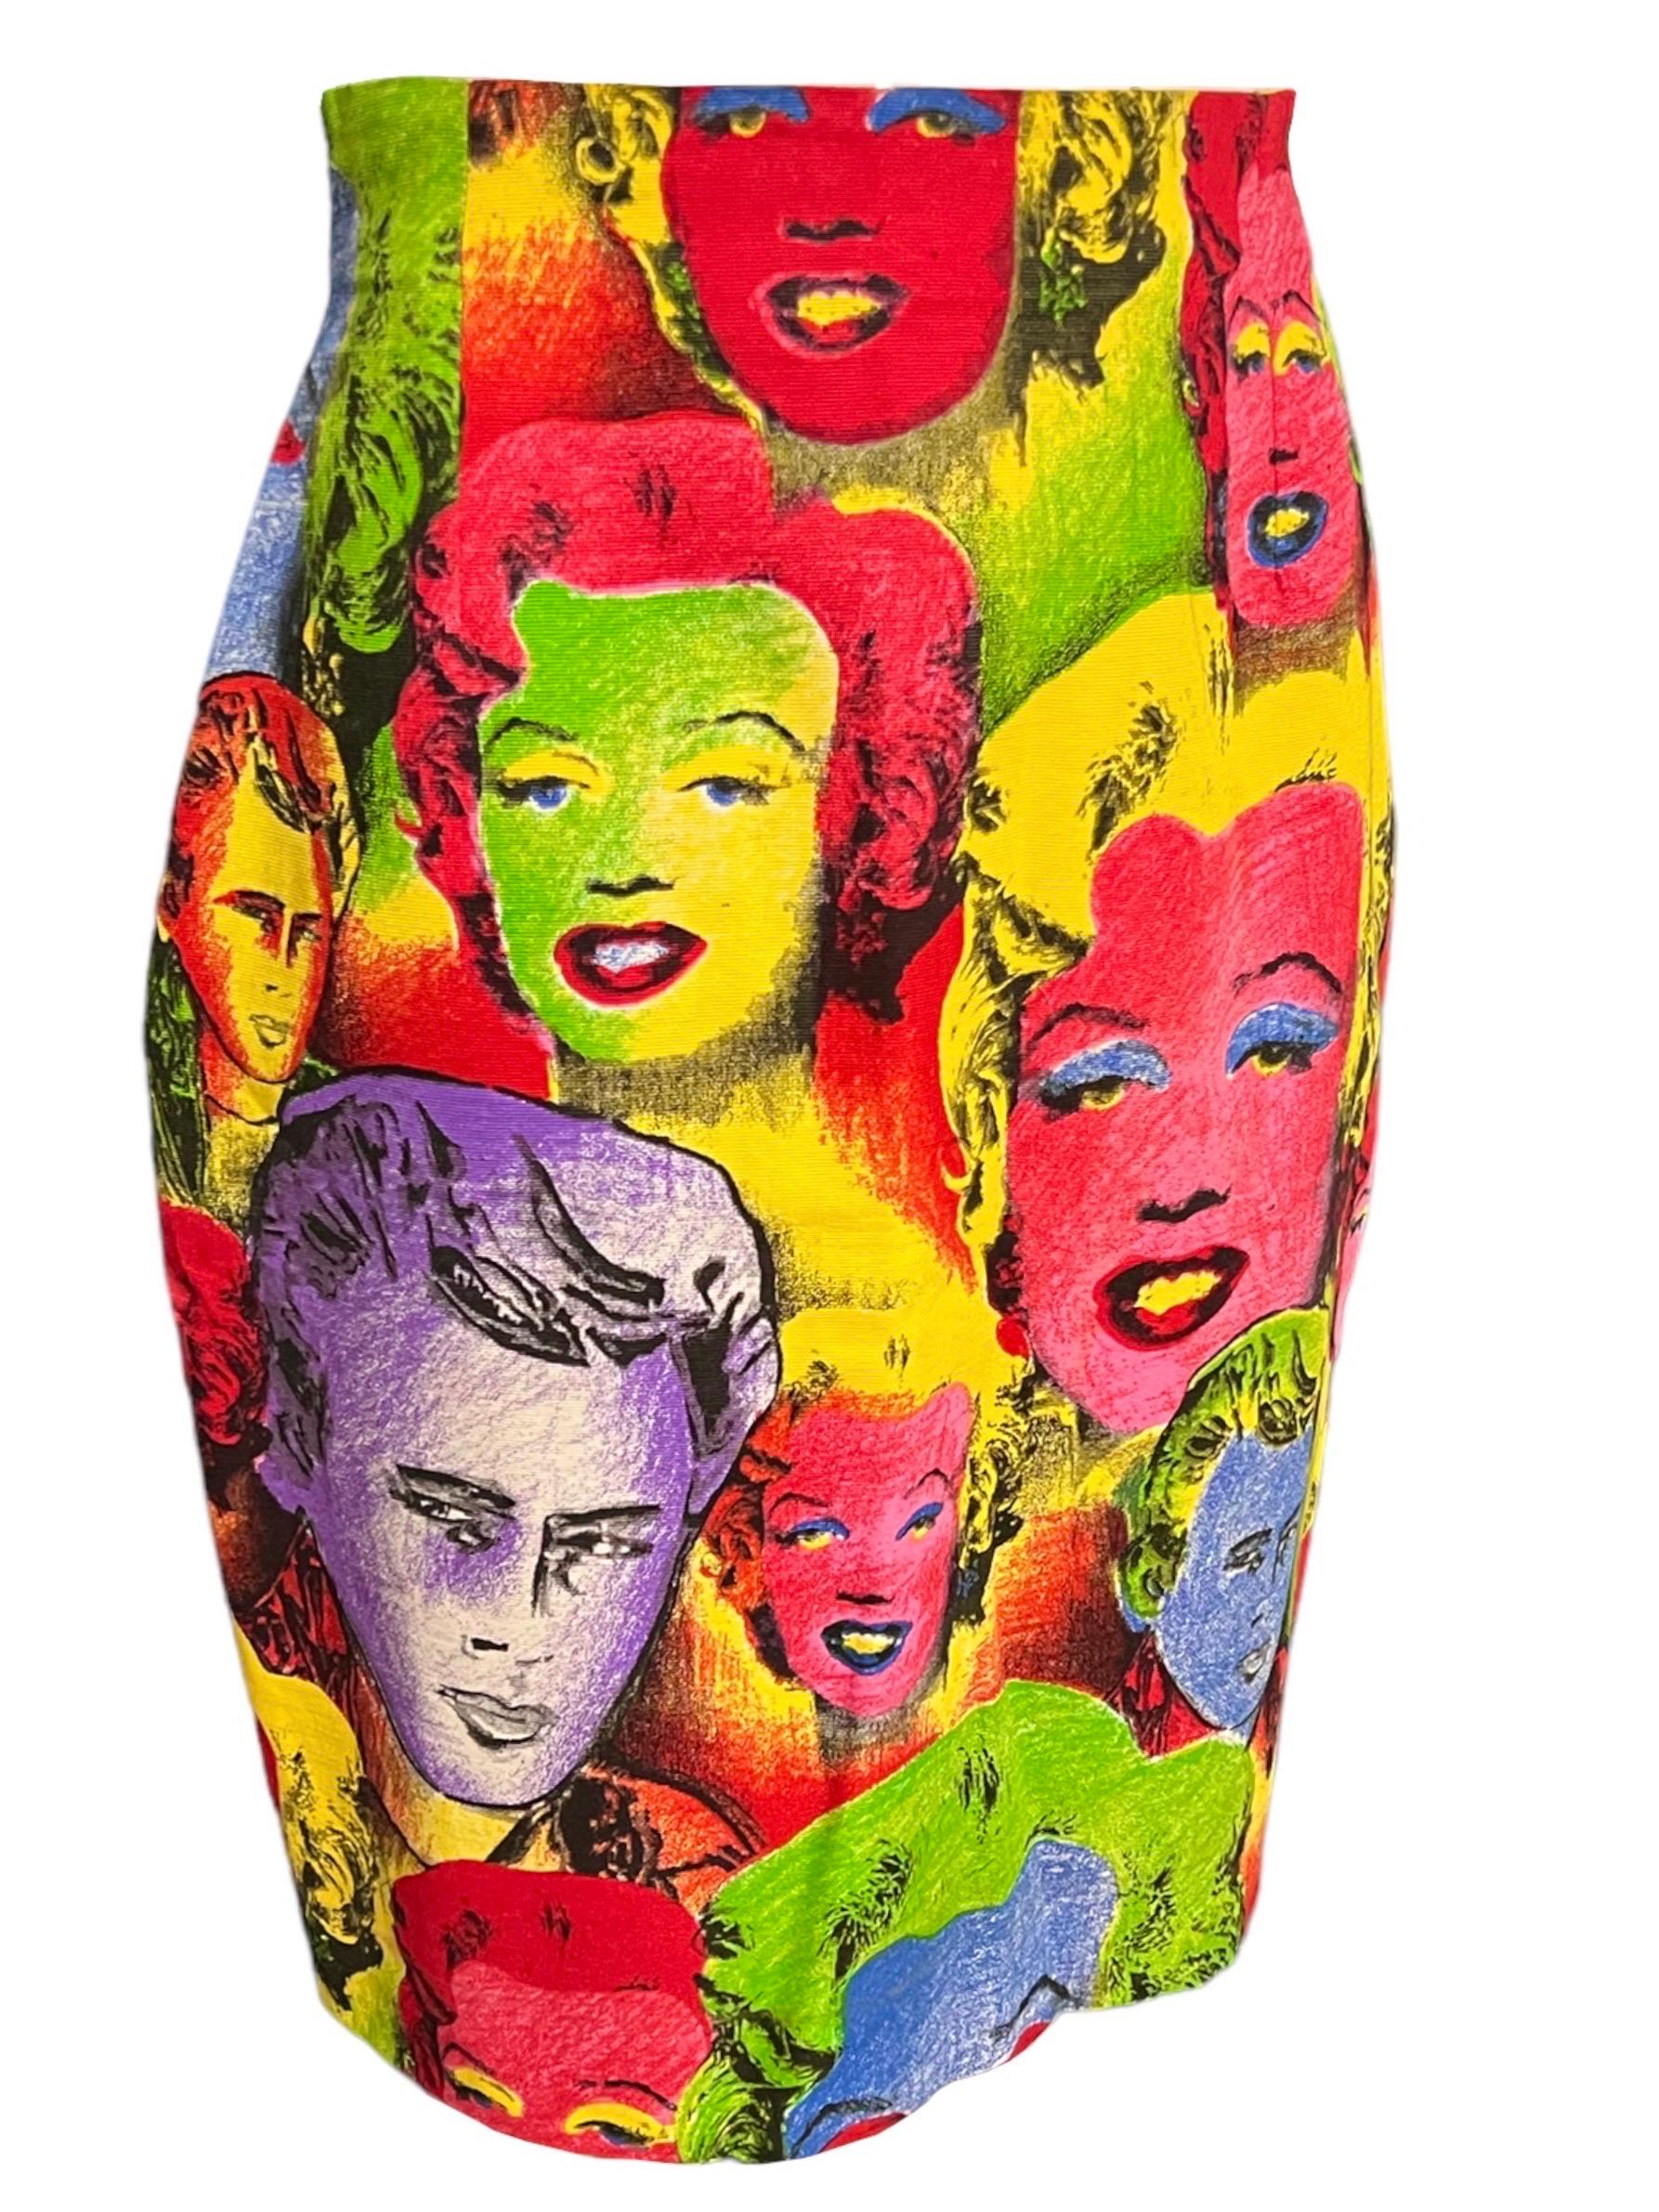 S/S 1991 Gianni Versace Marilyn Monroe James Dean Warhol Printed Skirt In Excellent Condition For Sale In Concord, NC